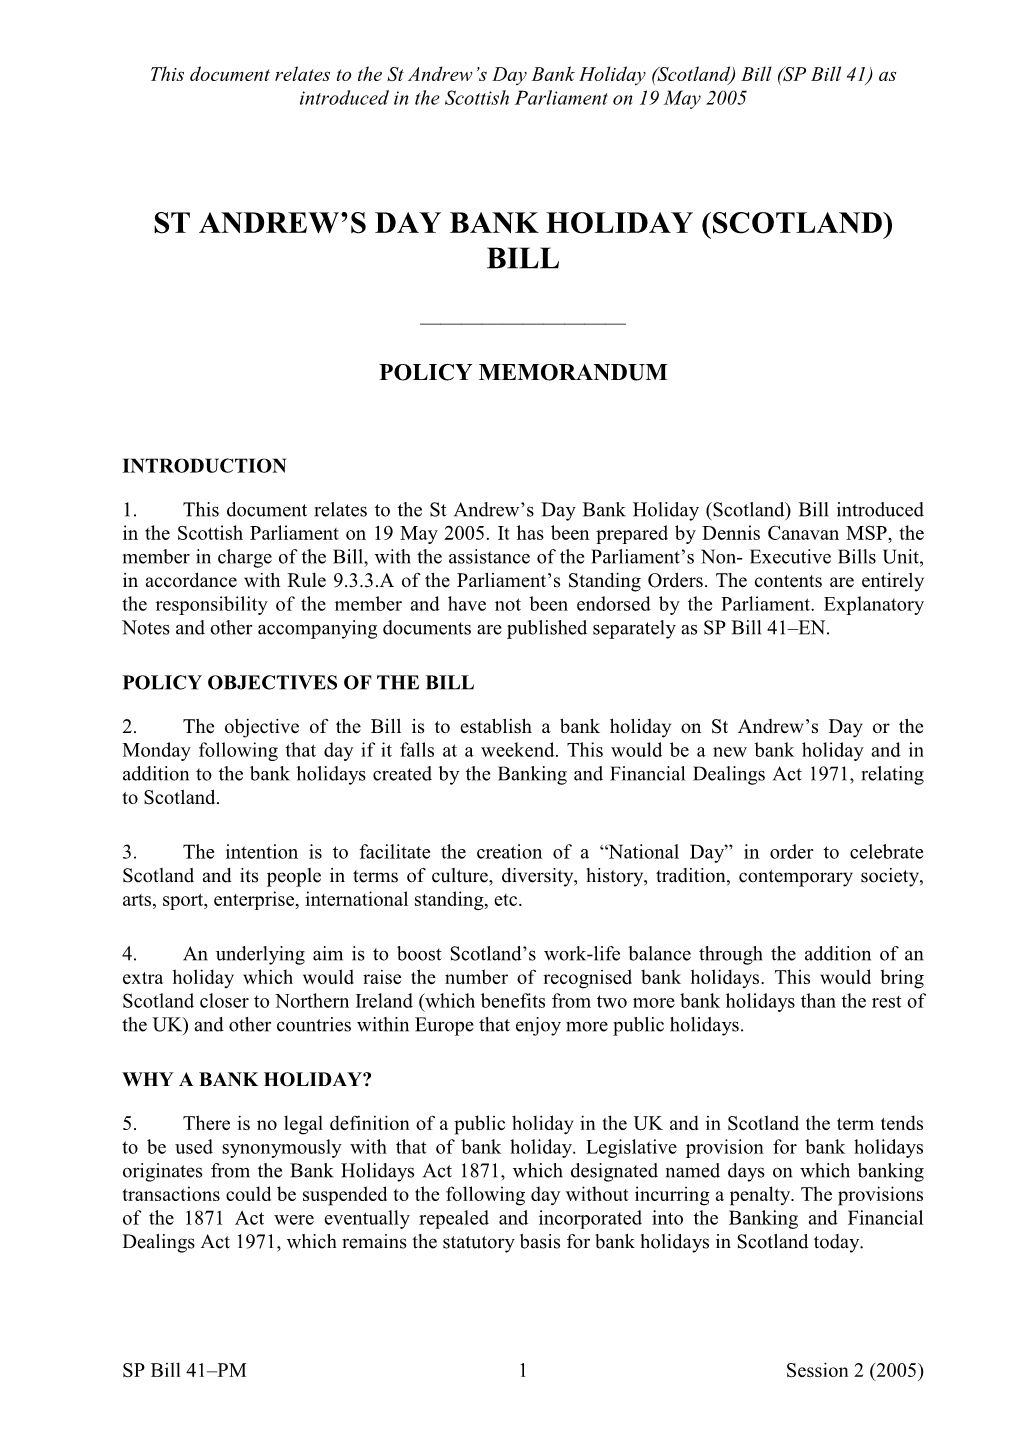 St Andrew's Day Bank Holiday (Scotland) Bill